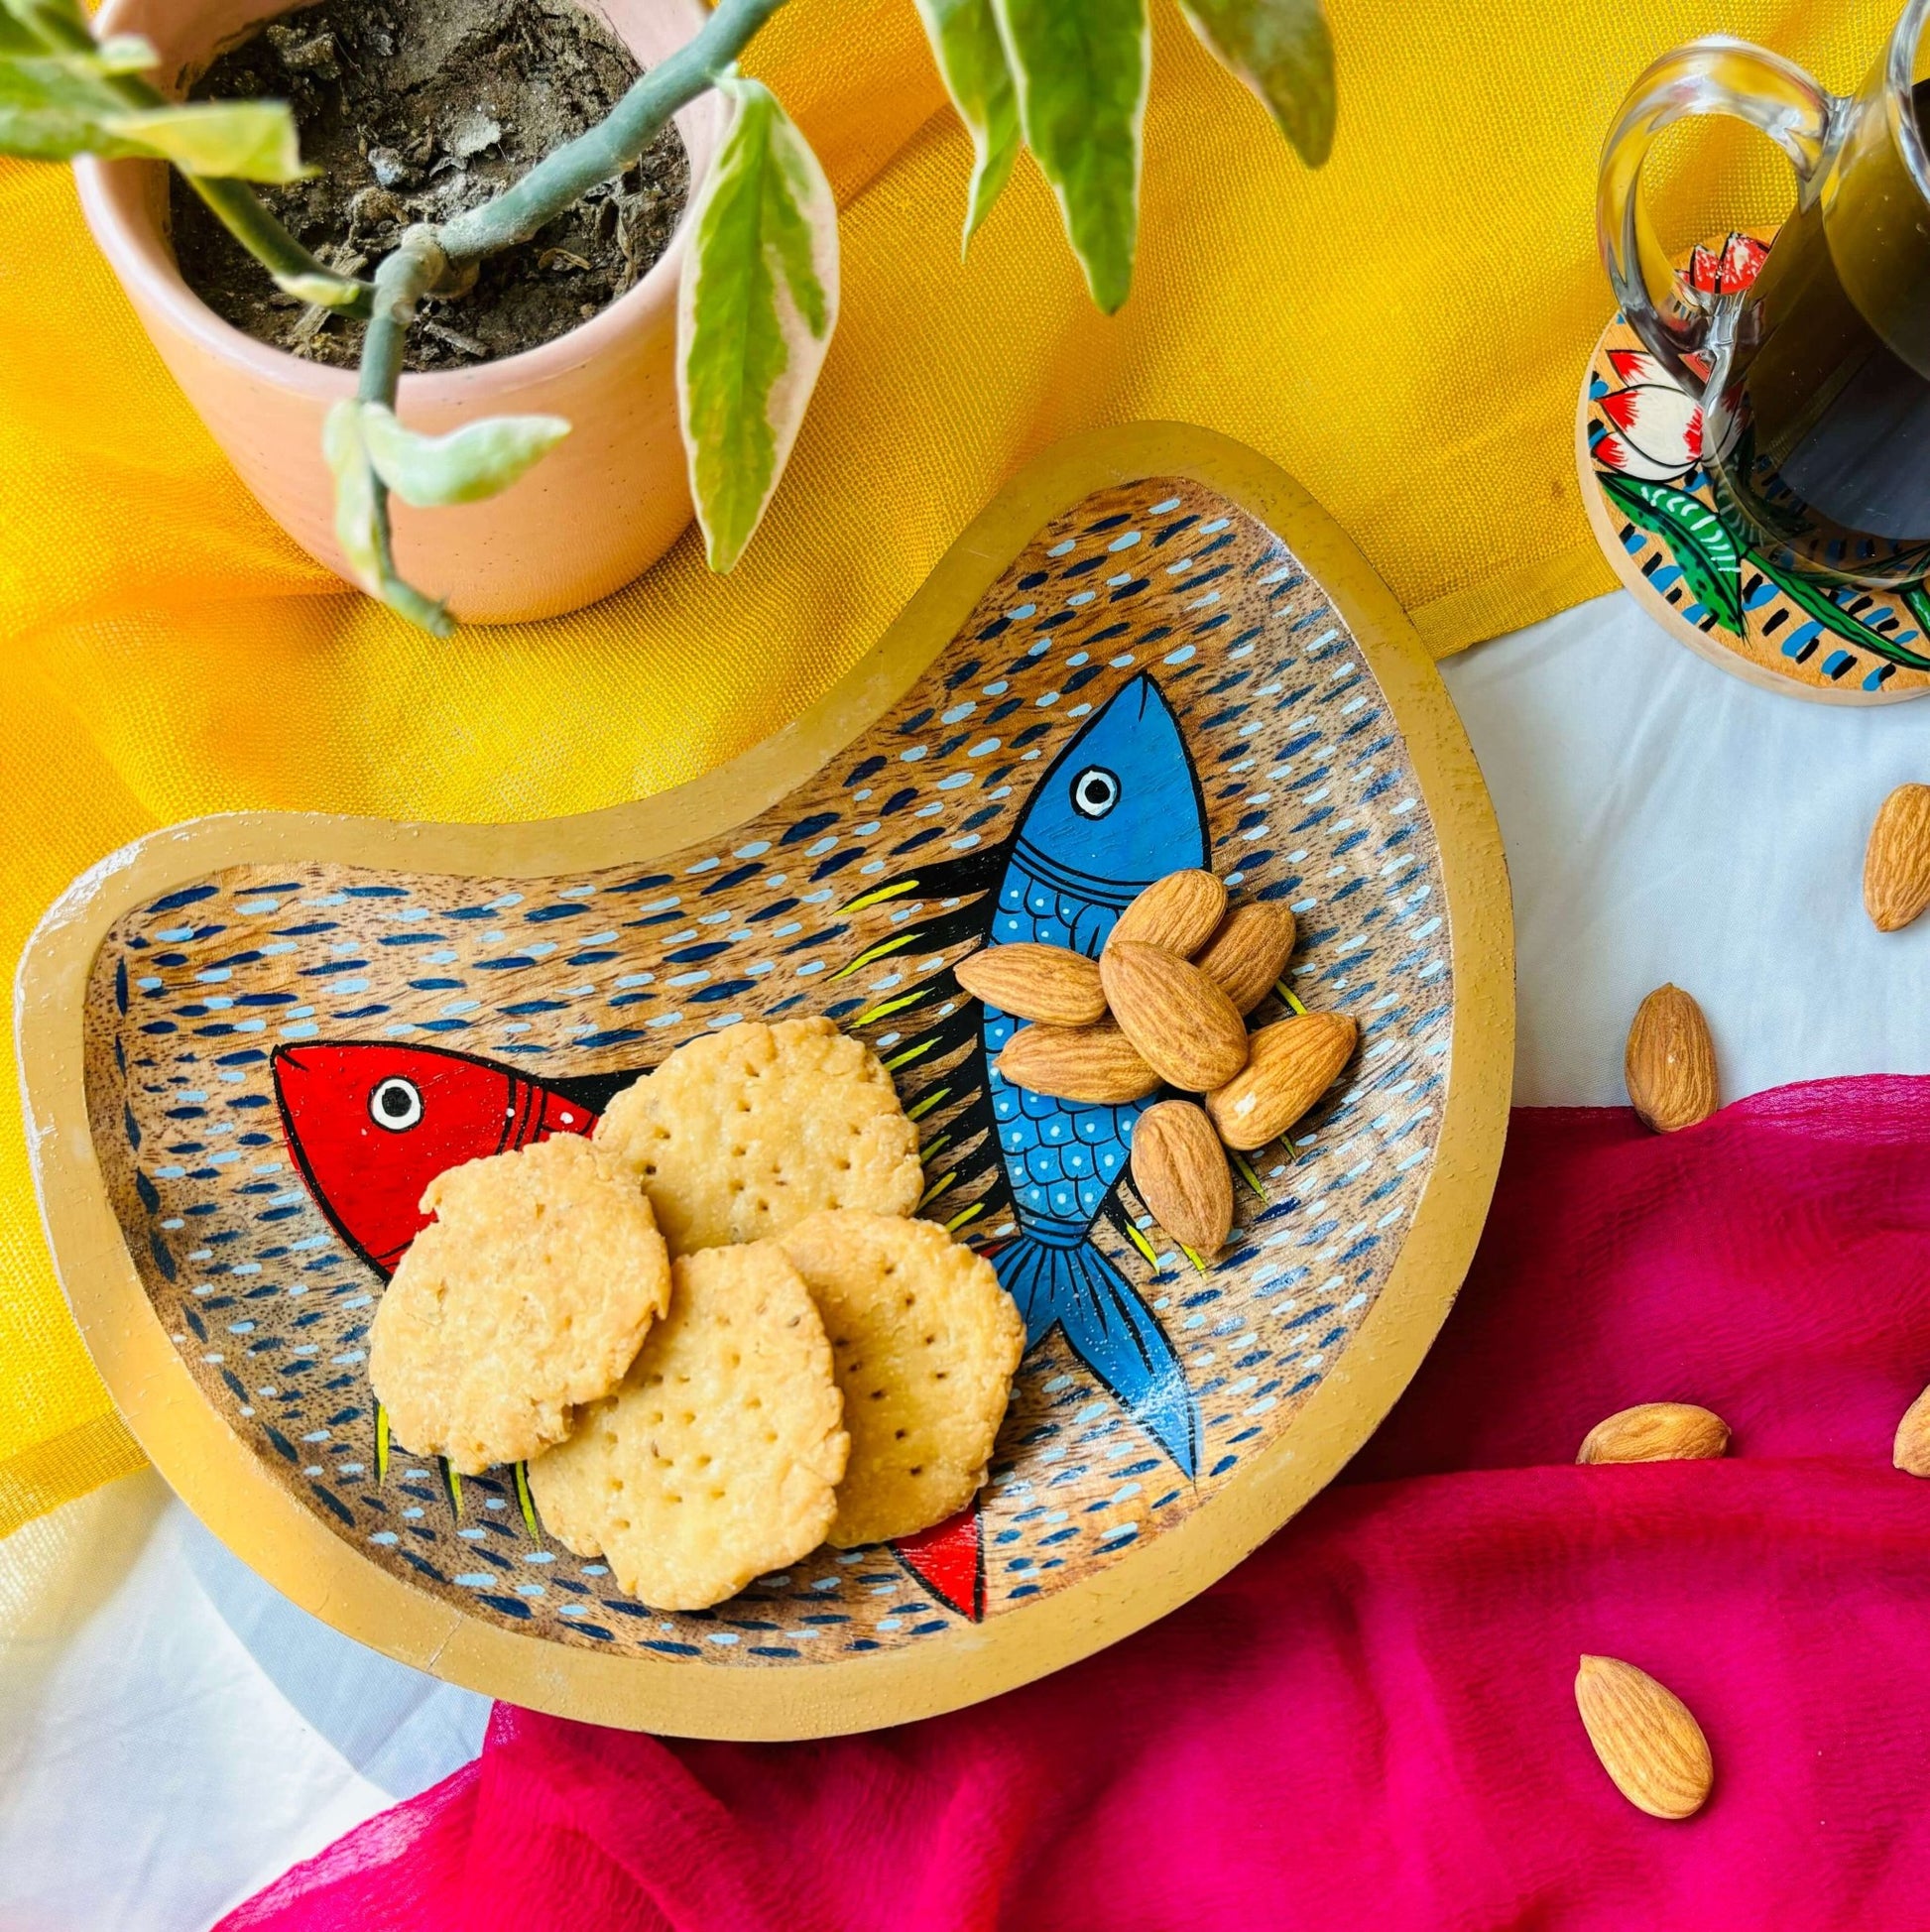 Biscuits and almonds are served in a handcrafted mango wood moon-shaped wooden tray for the kitchen, painted with two fishes by generational Pattachitra artists